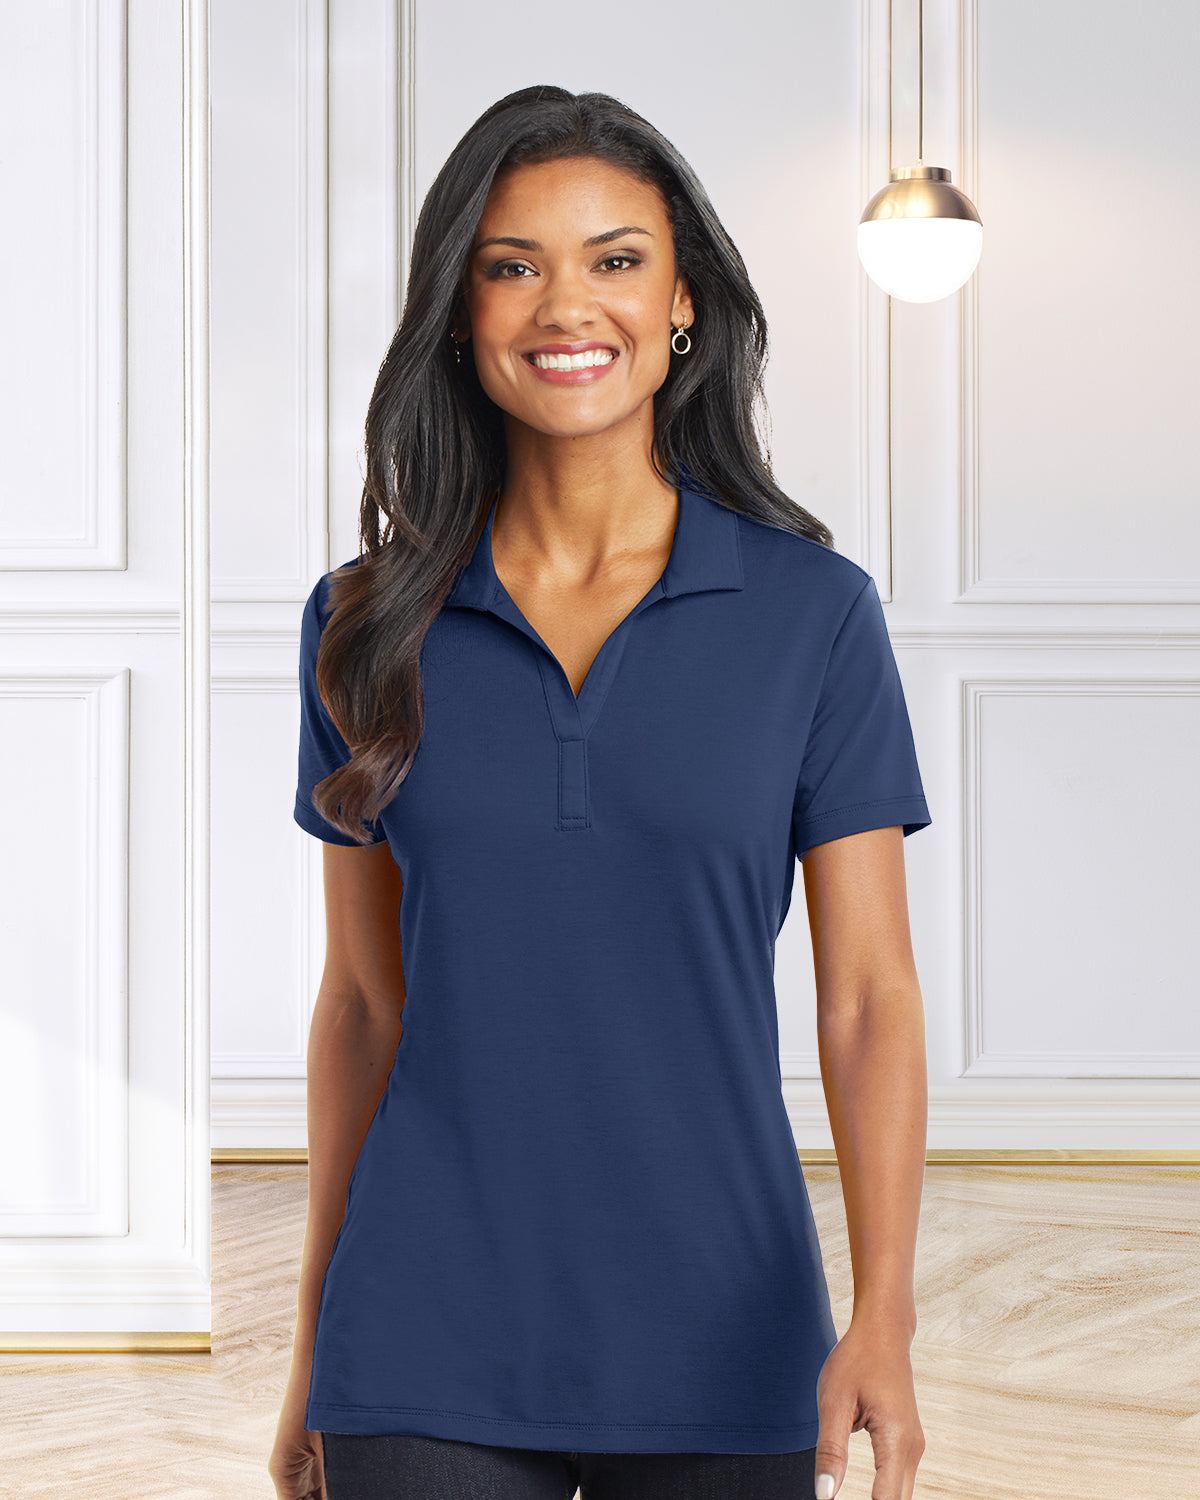 Port Authority® Ladies Cotton Touch™ Performance Polo - L568 – GH